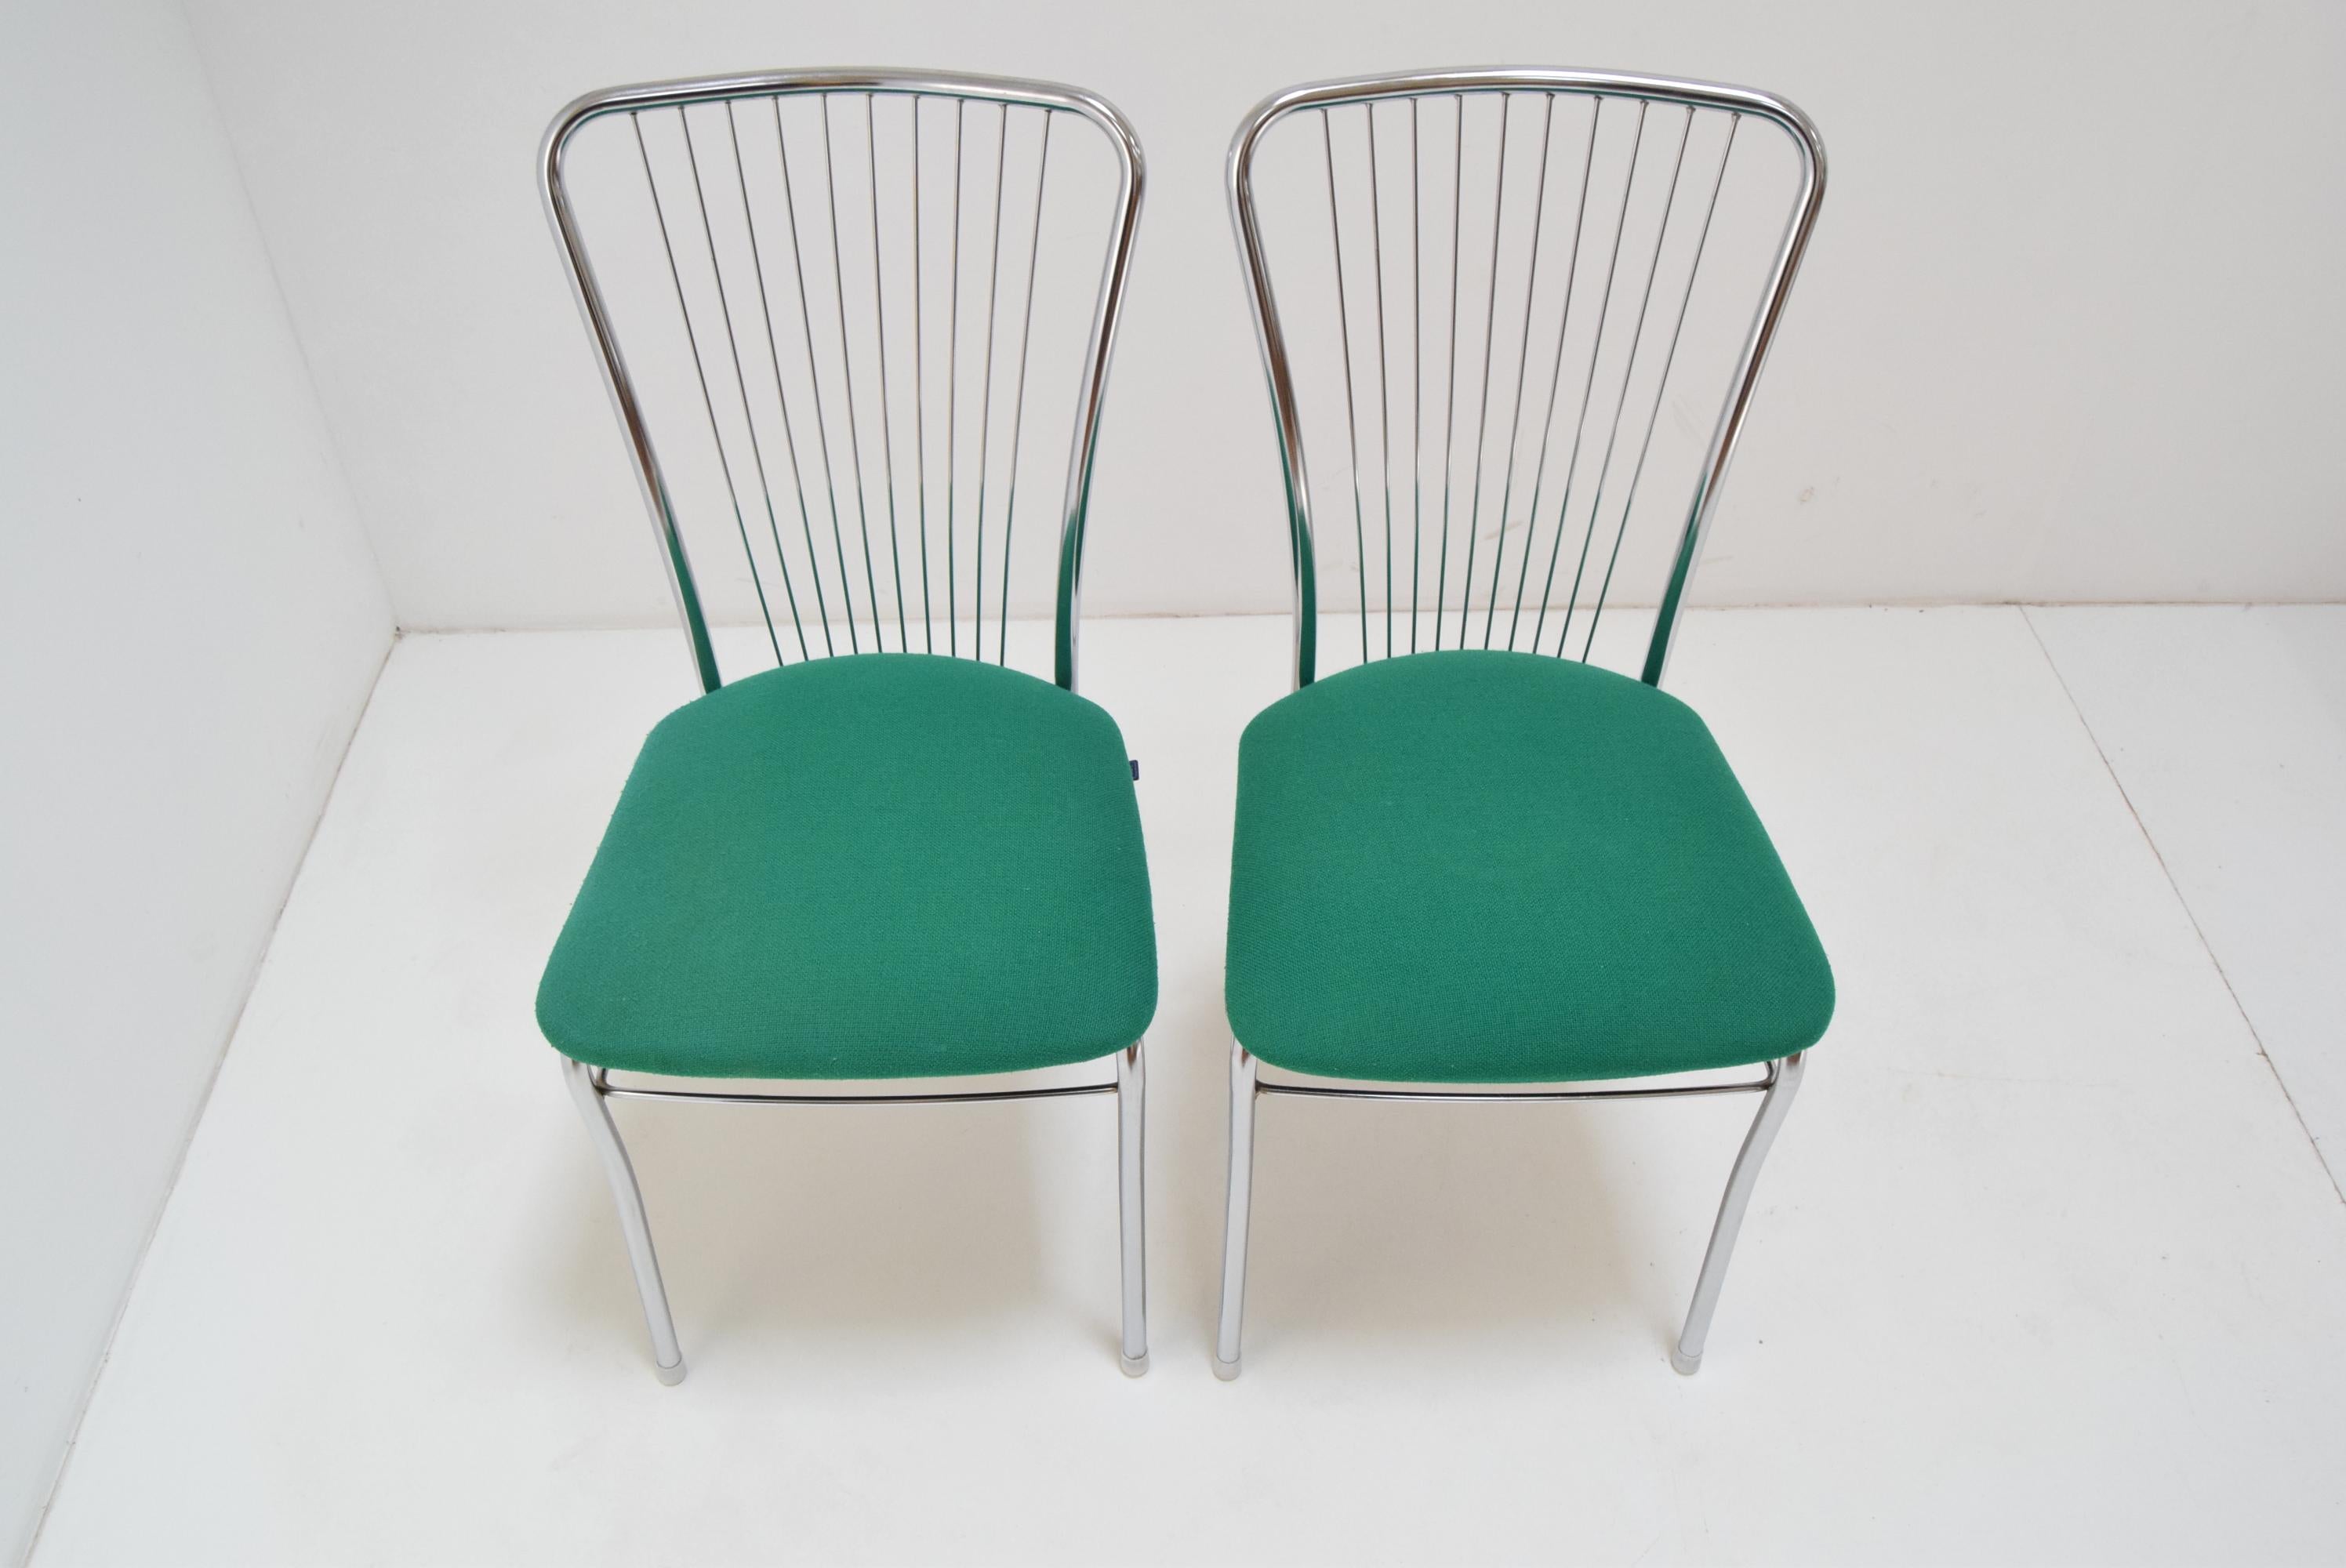 Pair of Mid-Century Chrome Chairs, Nowy Styl, circa 1980's For Sale 1